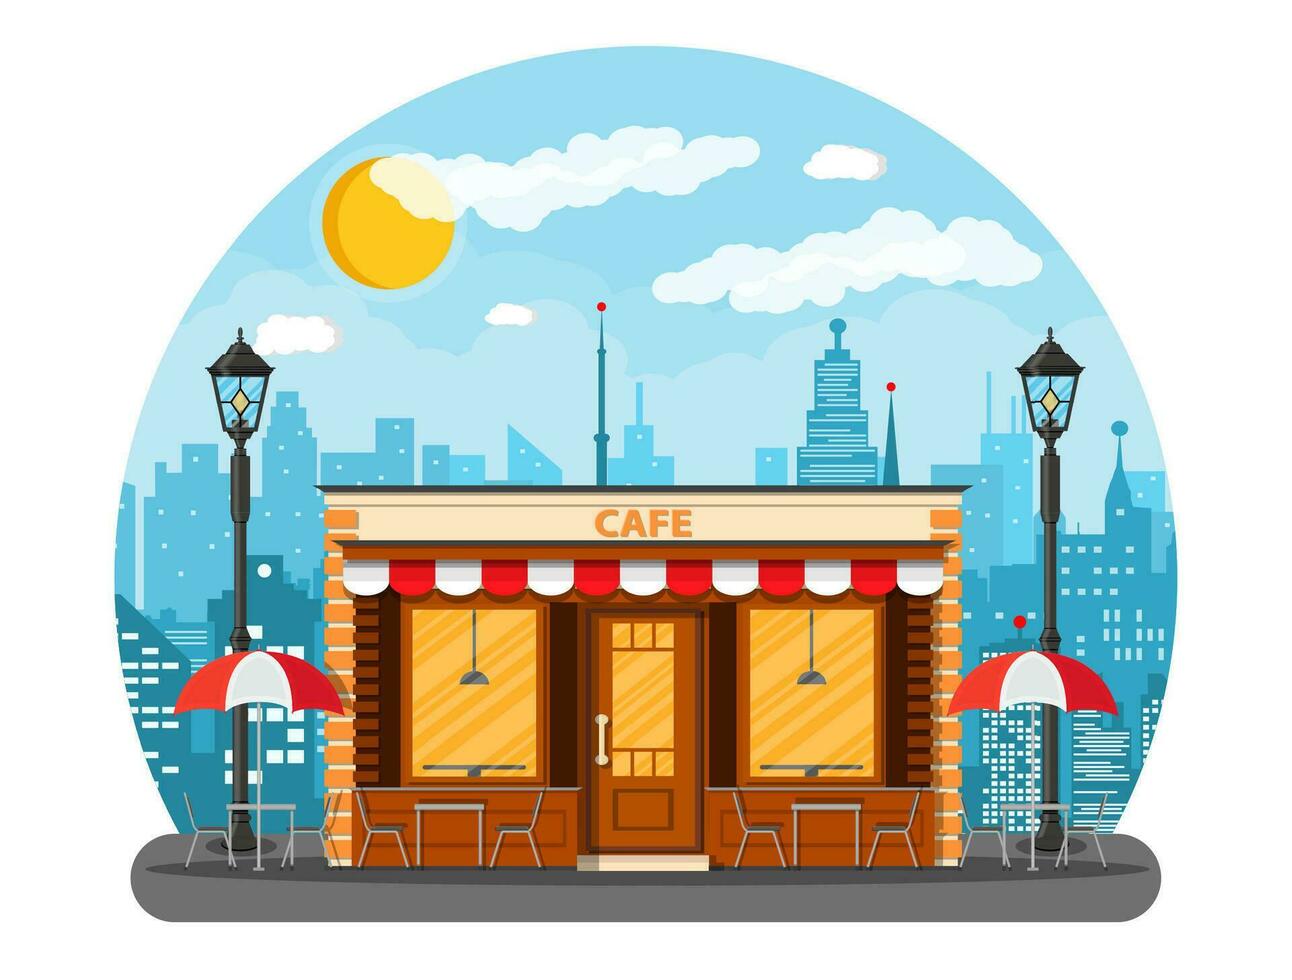 Cafe shop exterior. Street restraunt building. Cityscape, buildings, sun, clouds. Vector illustration in flat style